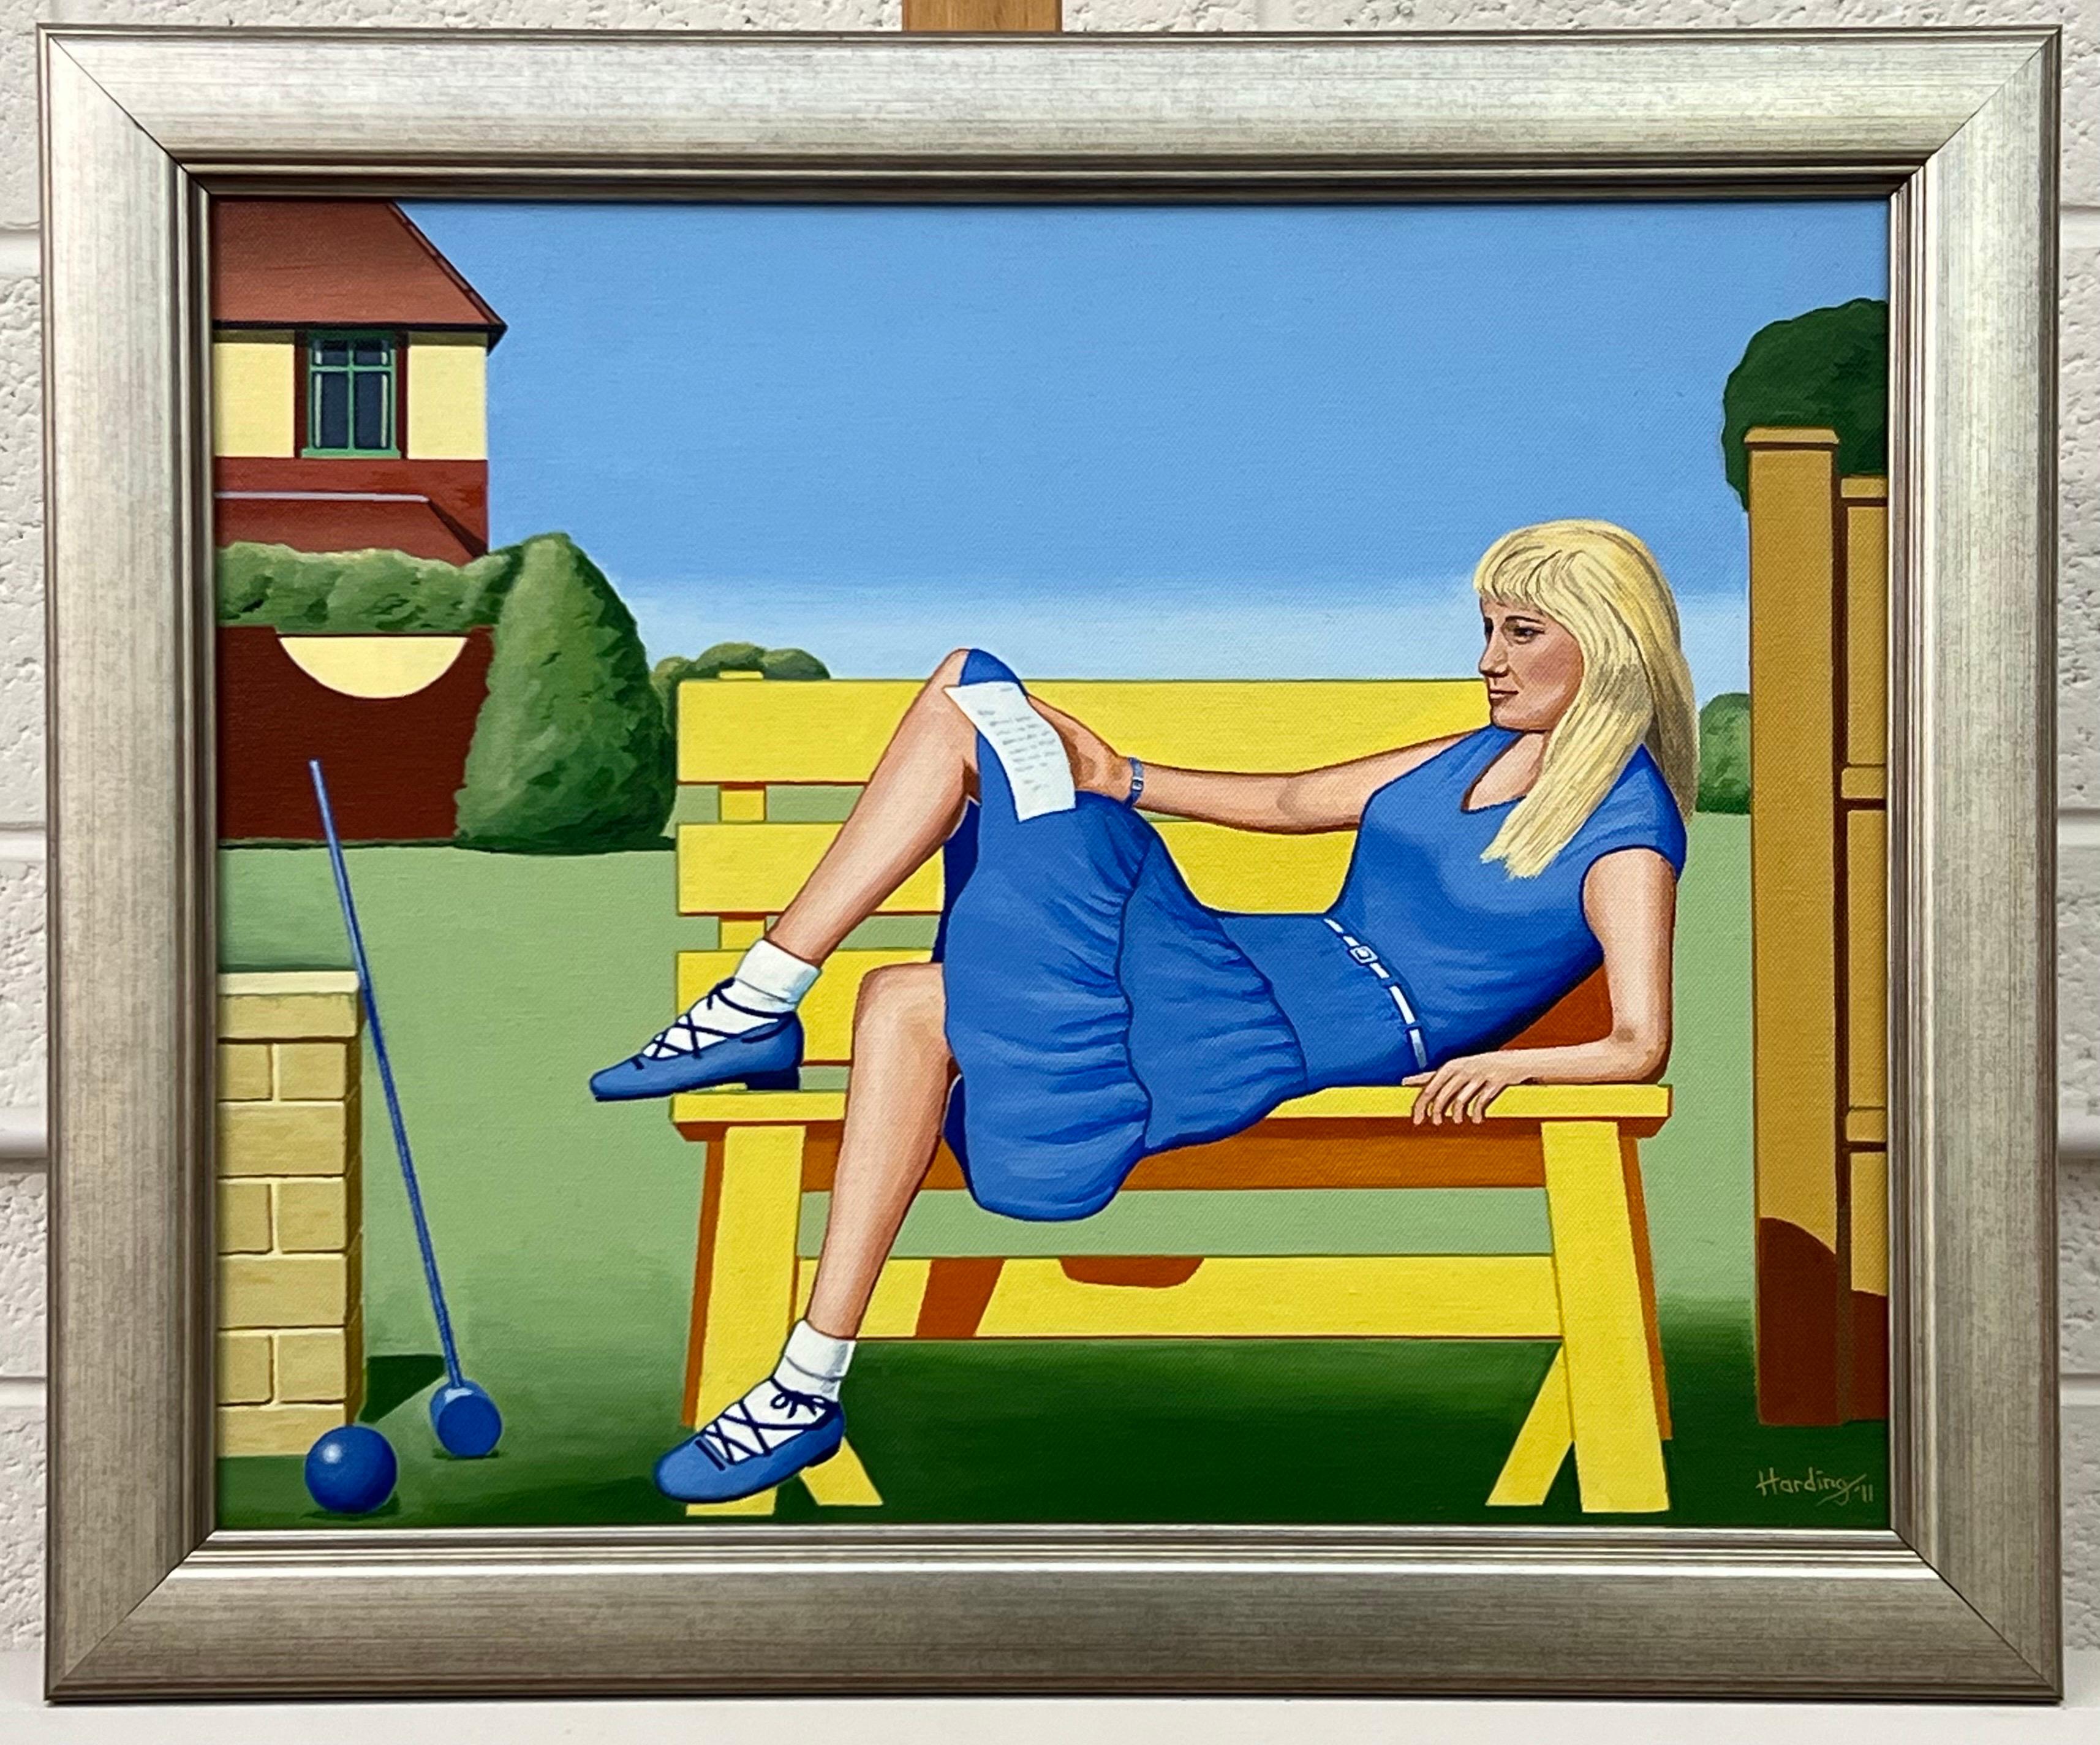 Vintage English Woman in Dress on Park Bench in Suburbia 1960's 1970's England - Painting by Paul F Harding